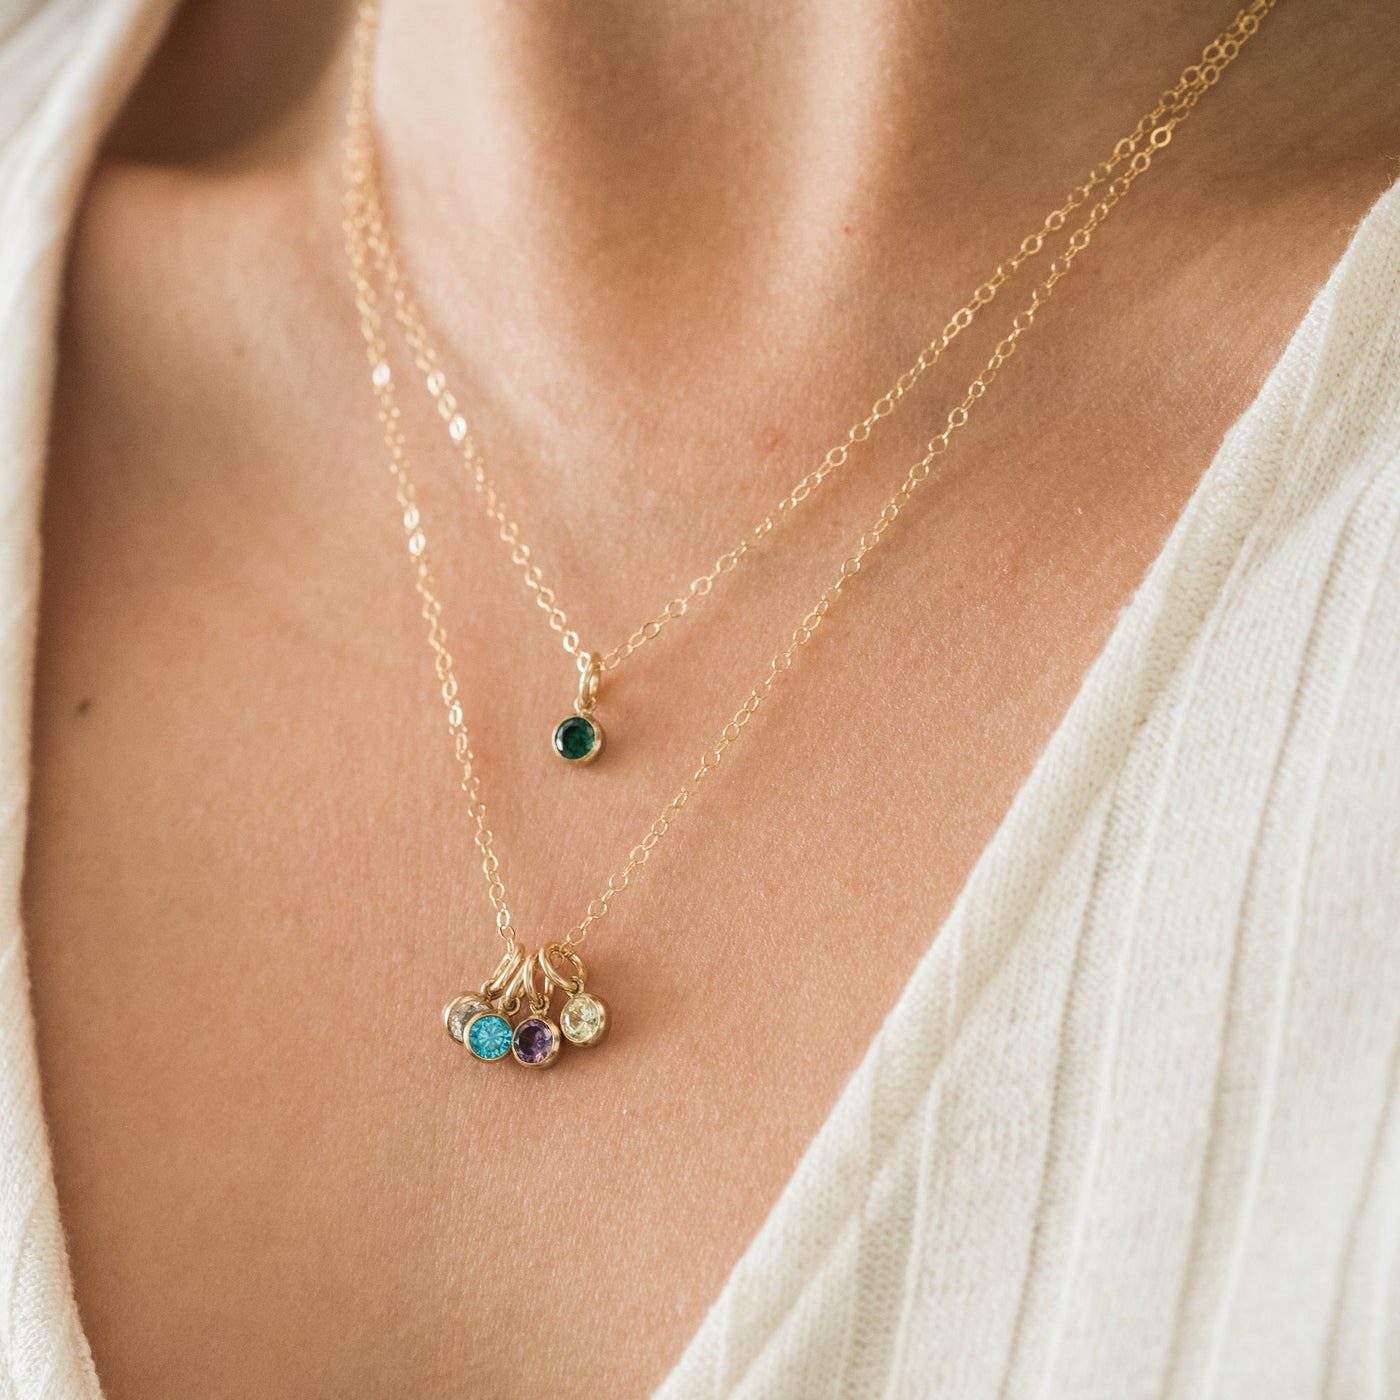 Birthstone Charm Necklace - Gold Filled - Dainty Coin Pendant